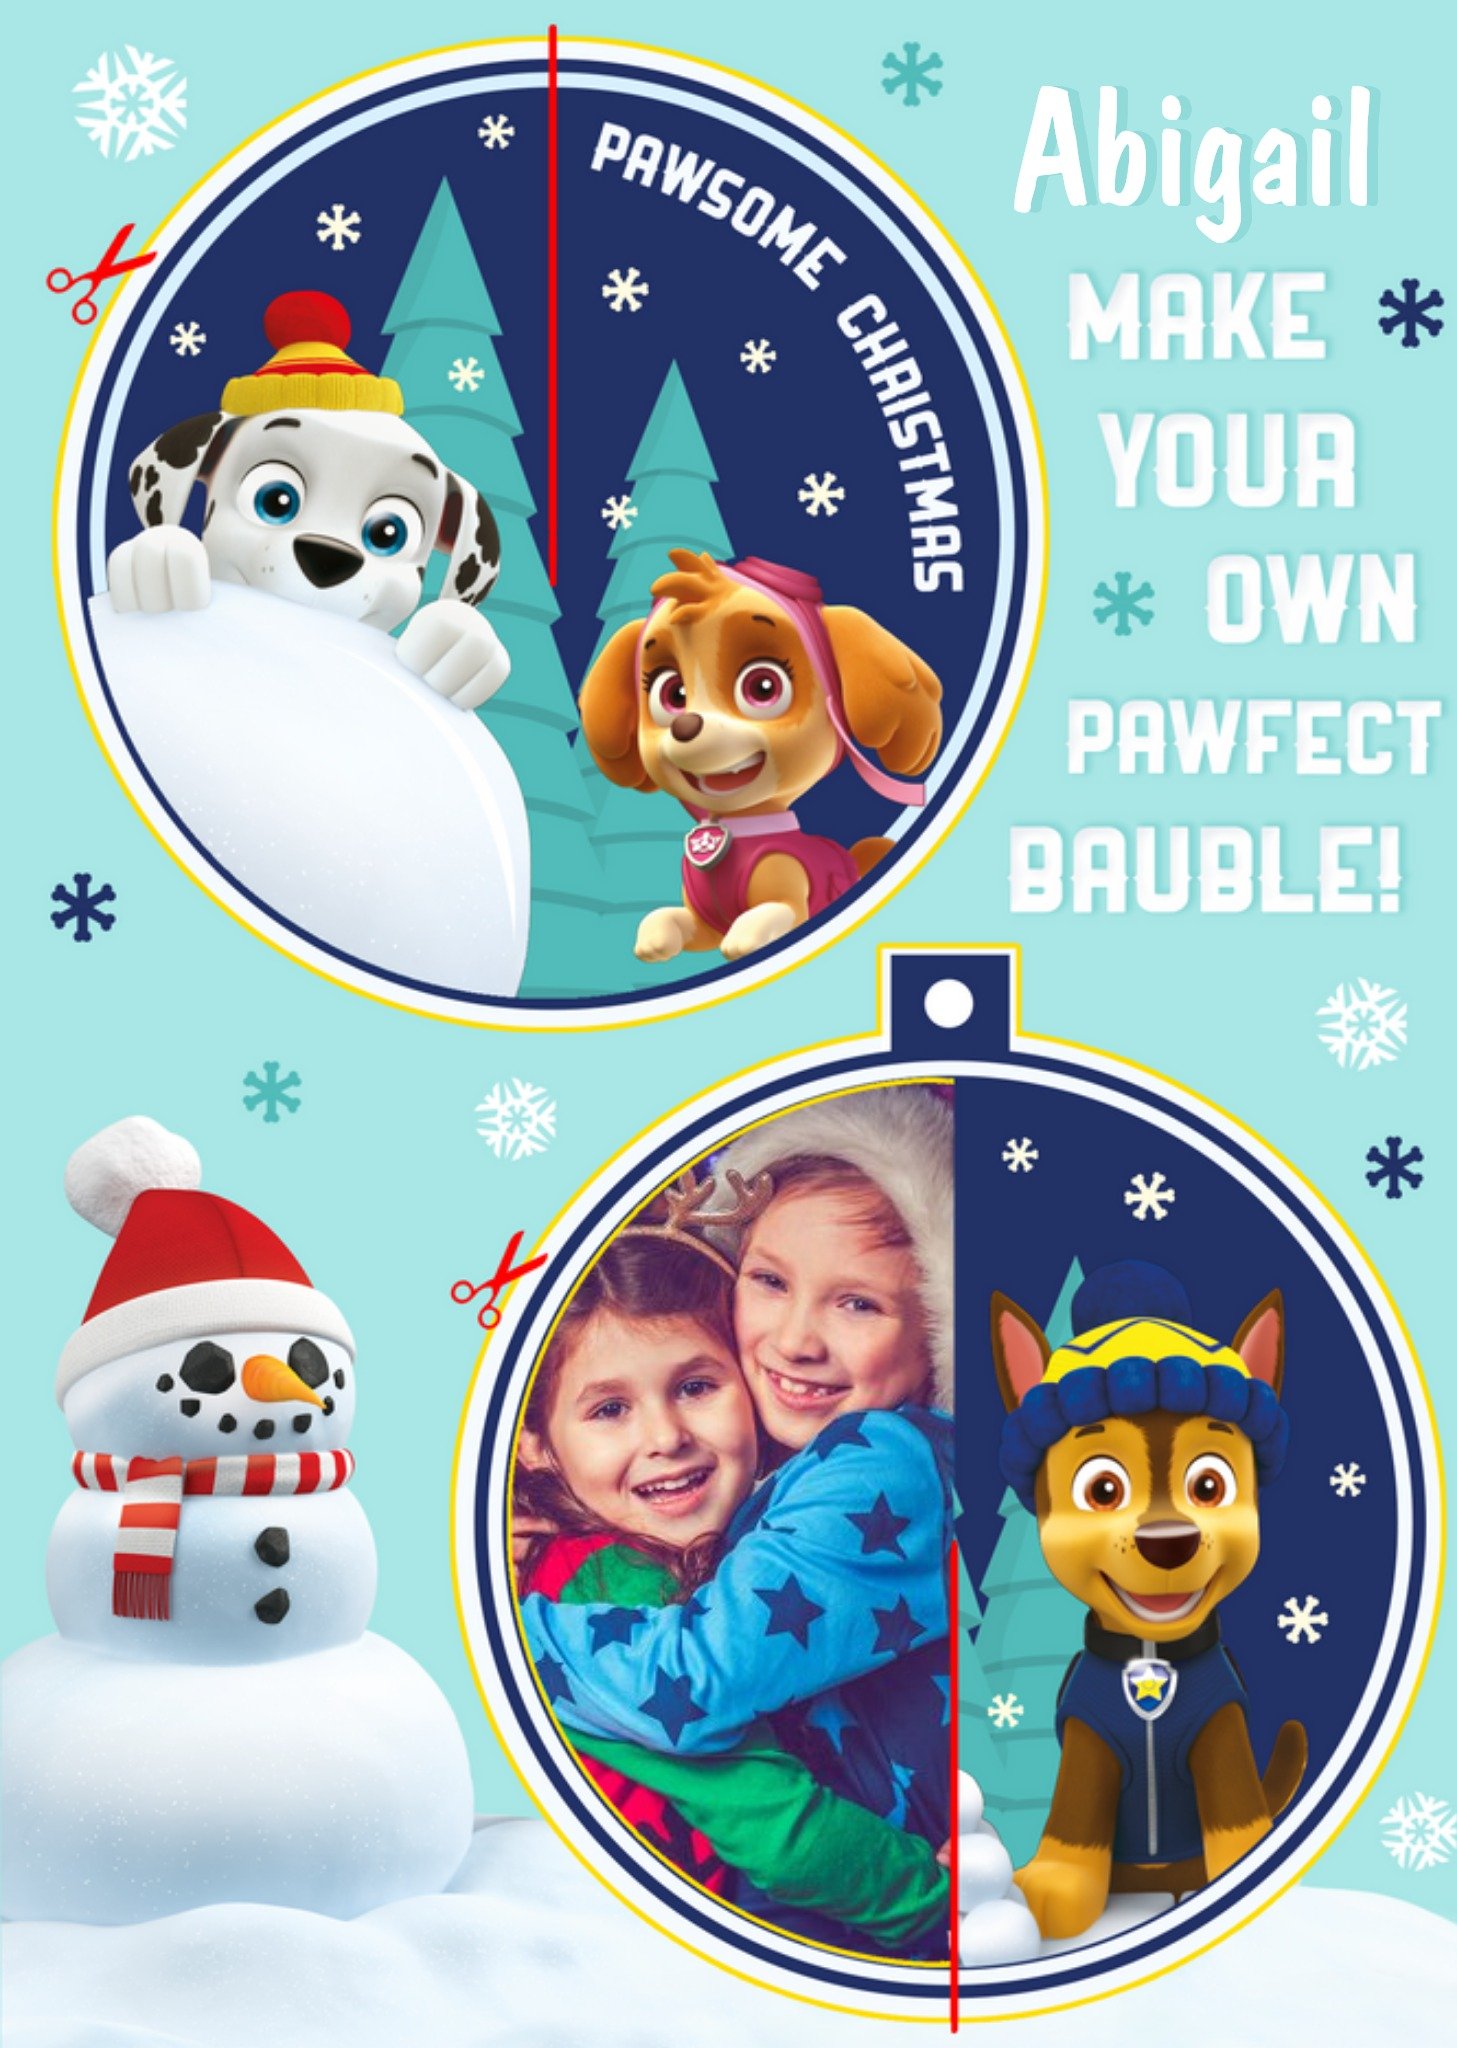 Paw Patrol Make Your Own Bauble Photo Upload Christmas Card, Large